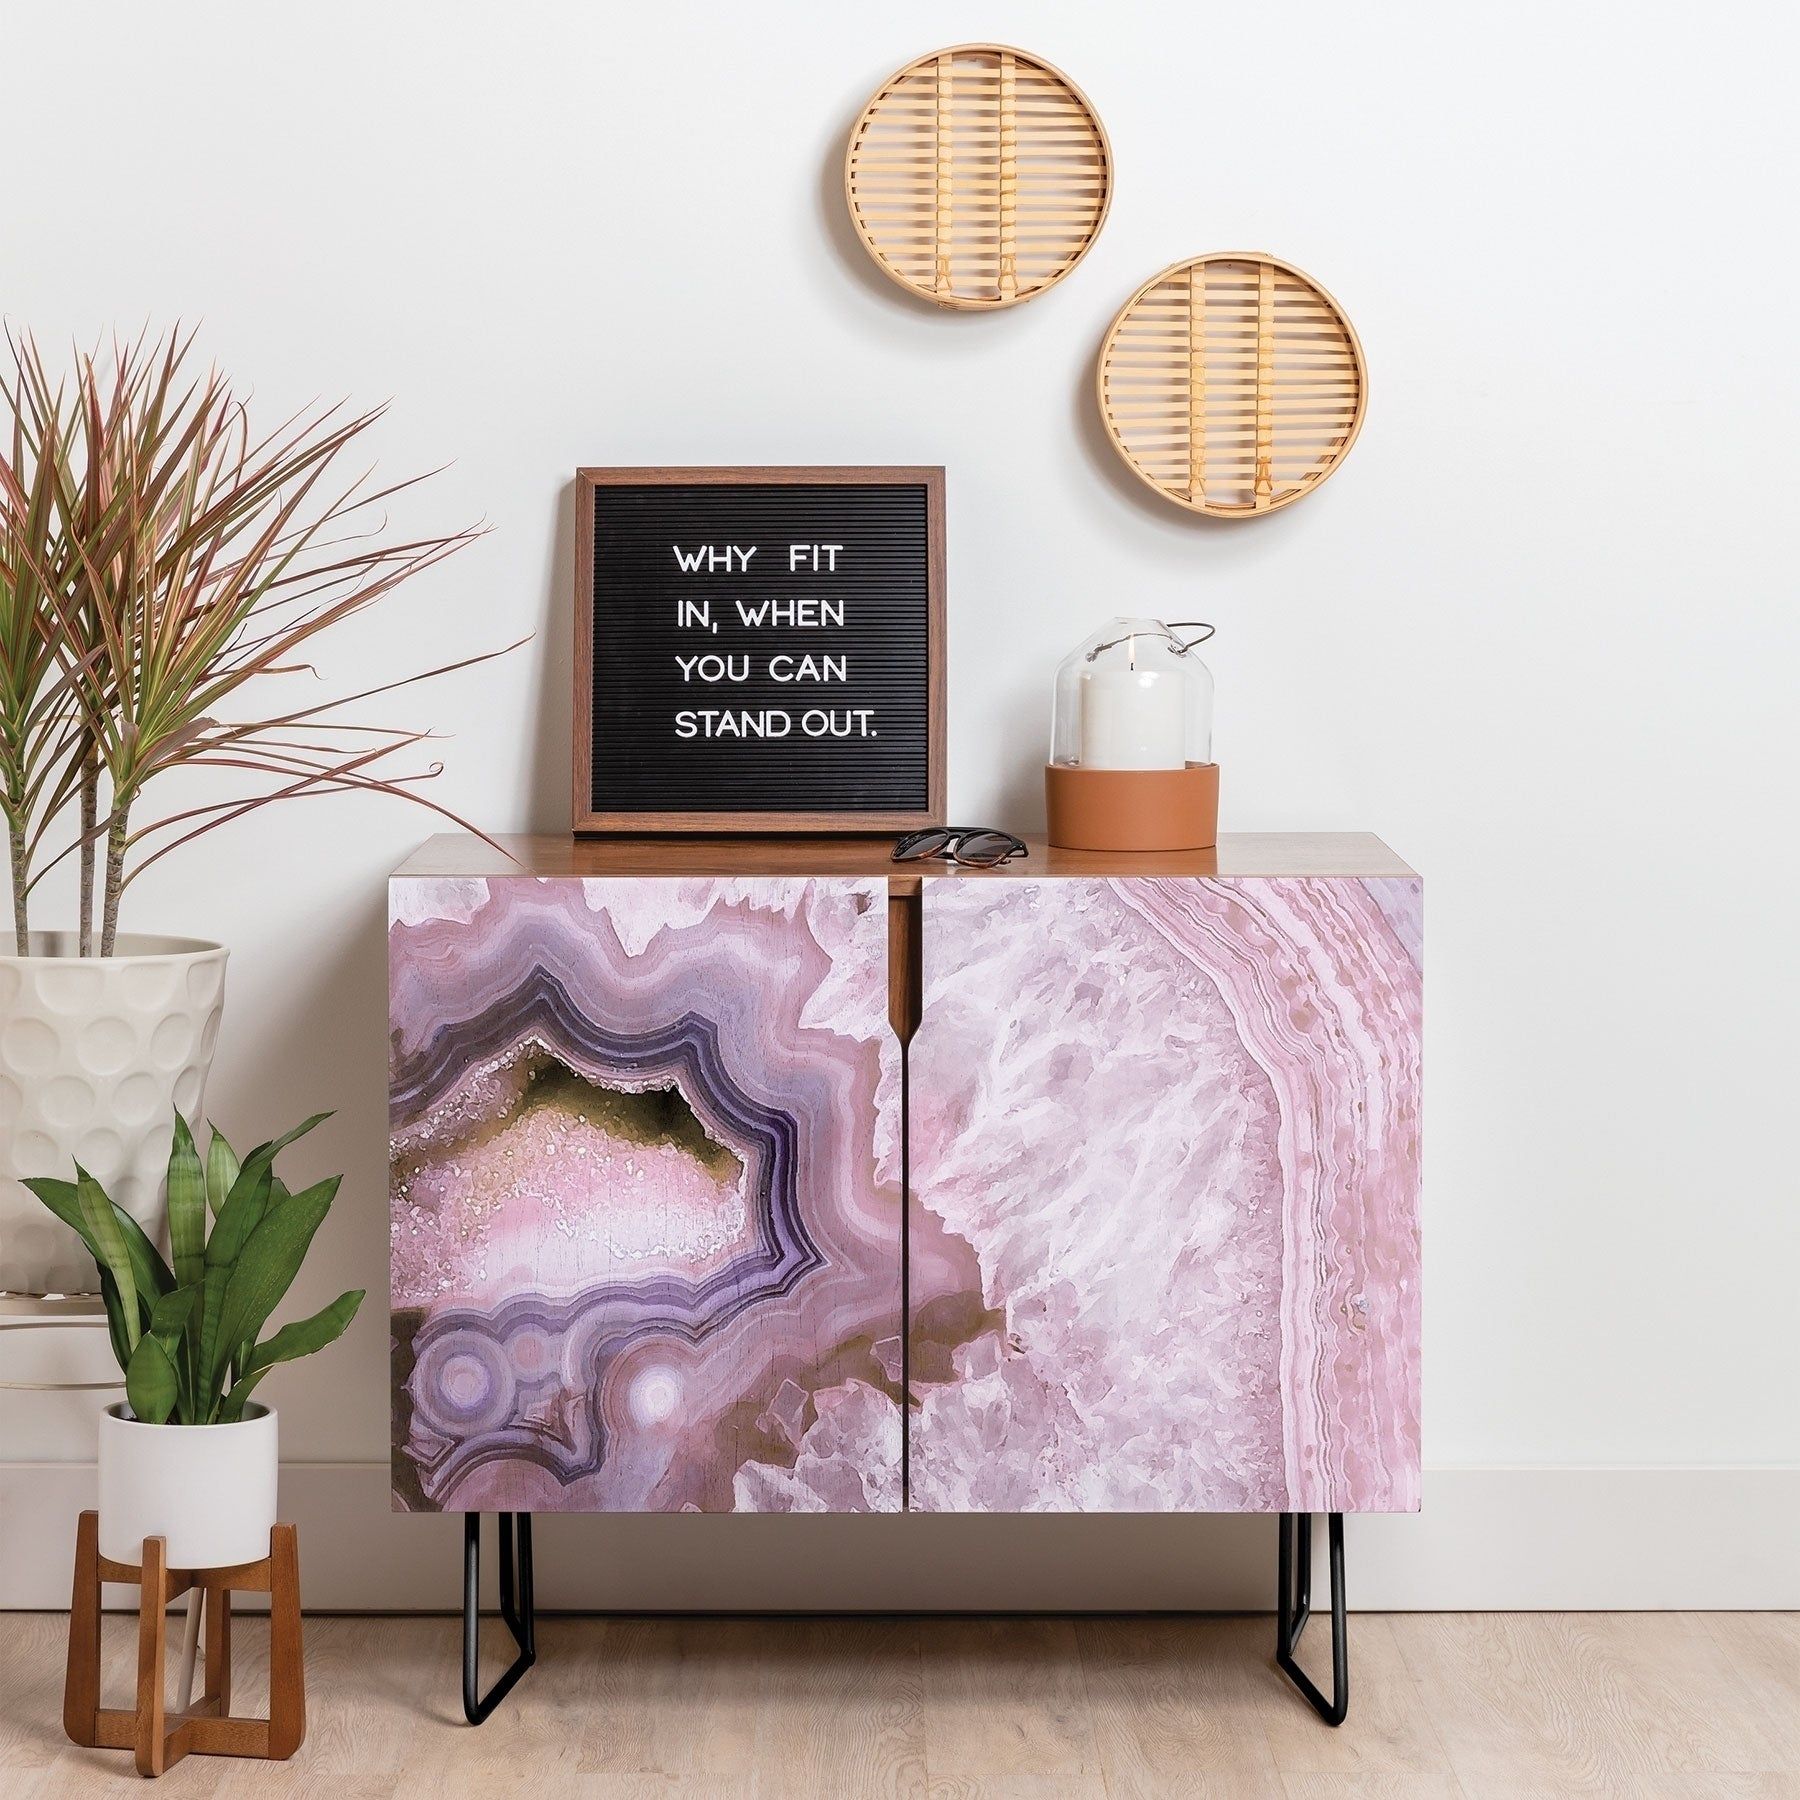 Deny Designs Pale Pink Agate Wood Credenza (3 Leg Options) Inside Pale Pink Agate Wood Credenzas (View 3 of 30)